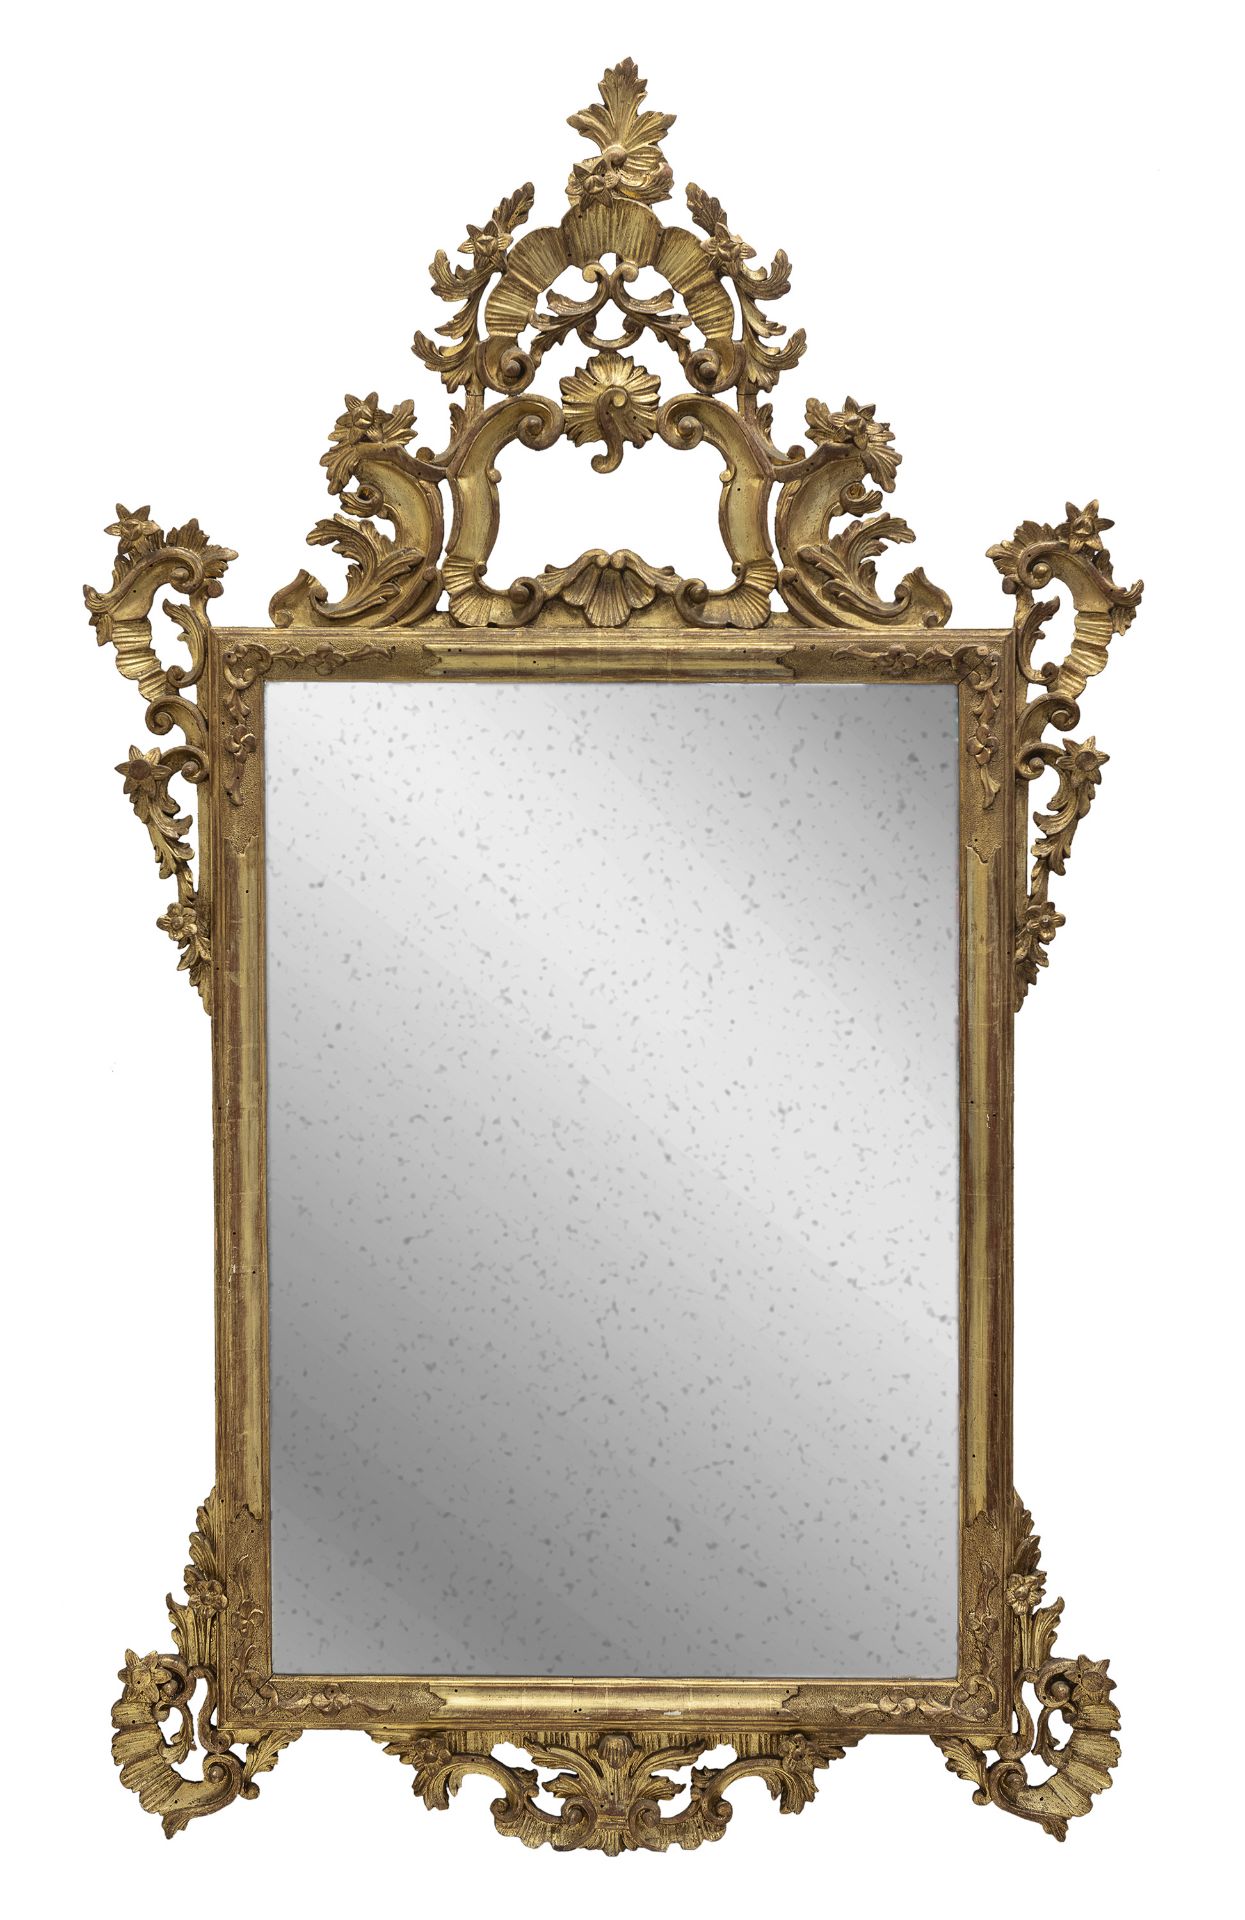 GILTWOOD MIRROR VENICE END OF THE 19TH CENTURY